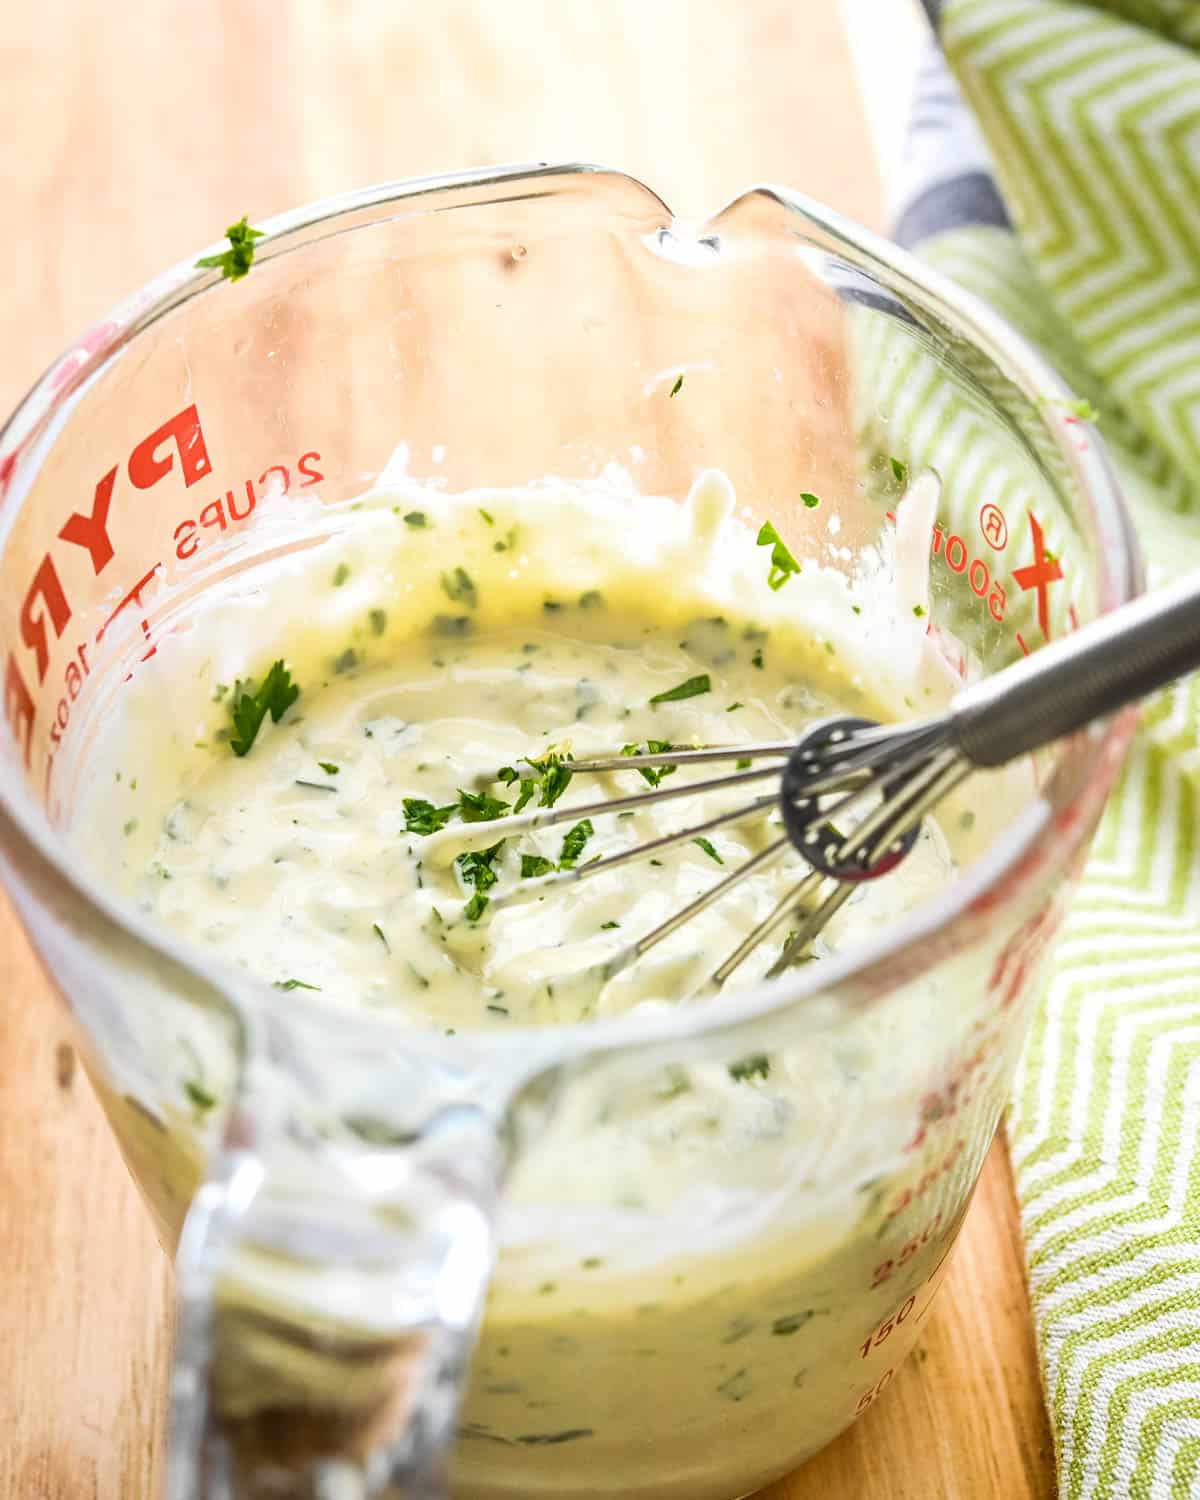 The dressing is a mayonnaise base with lots of seasonings and hot sauce.